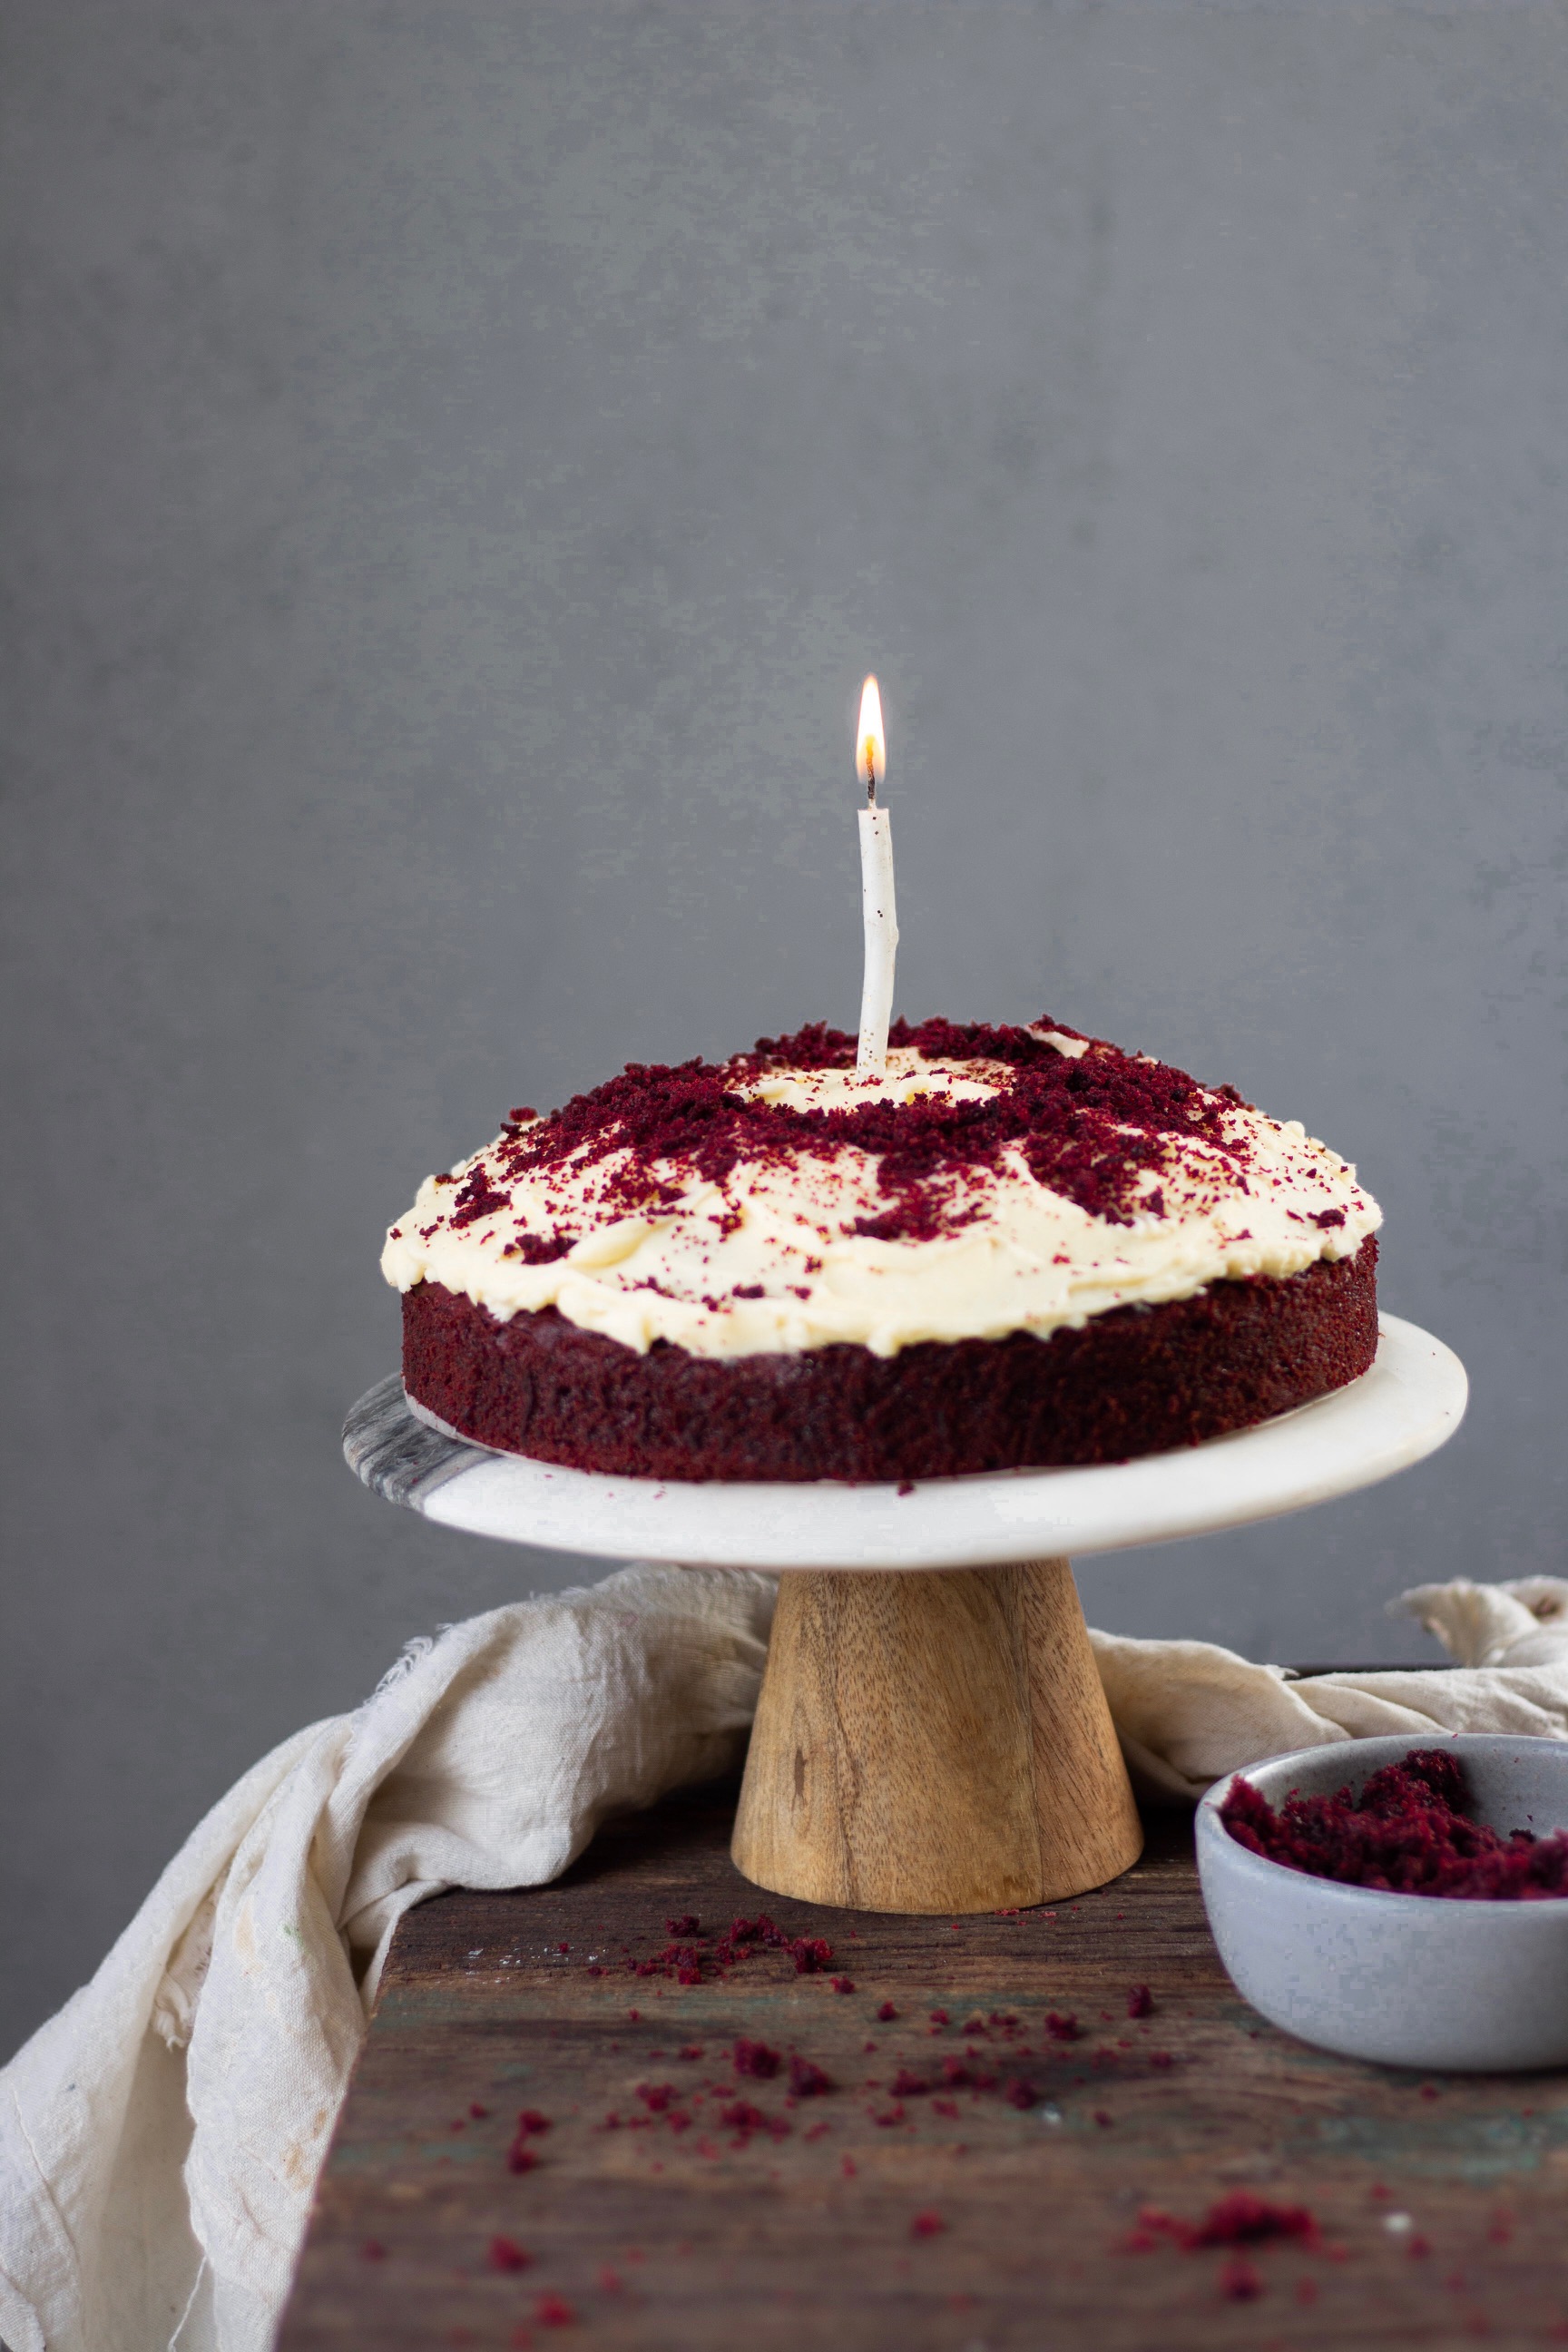 Barley and Beetroot Cake - Eggless and Low Gluten